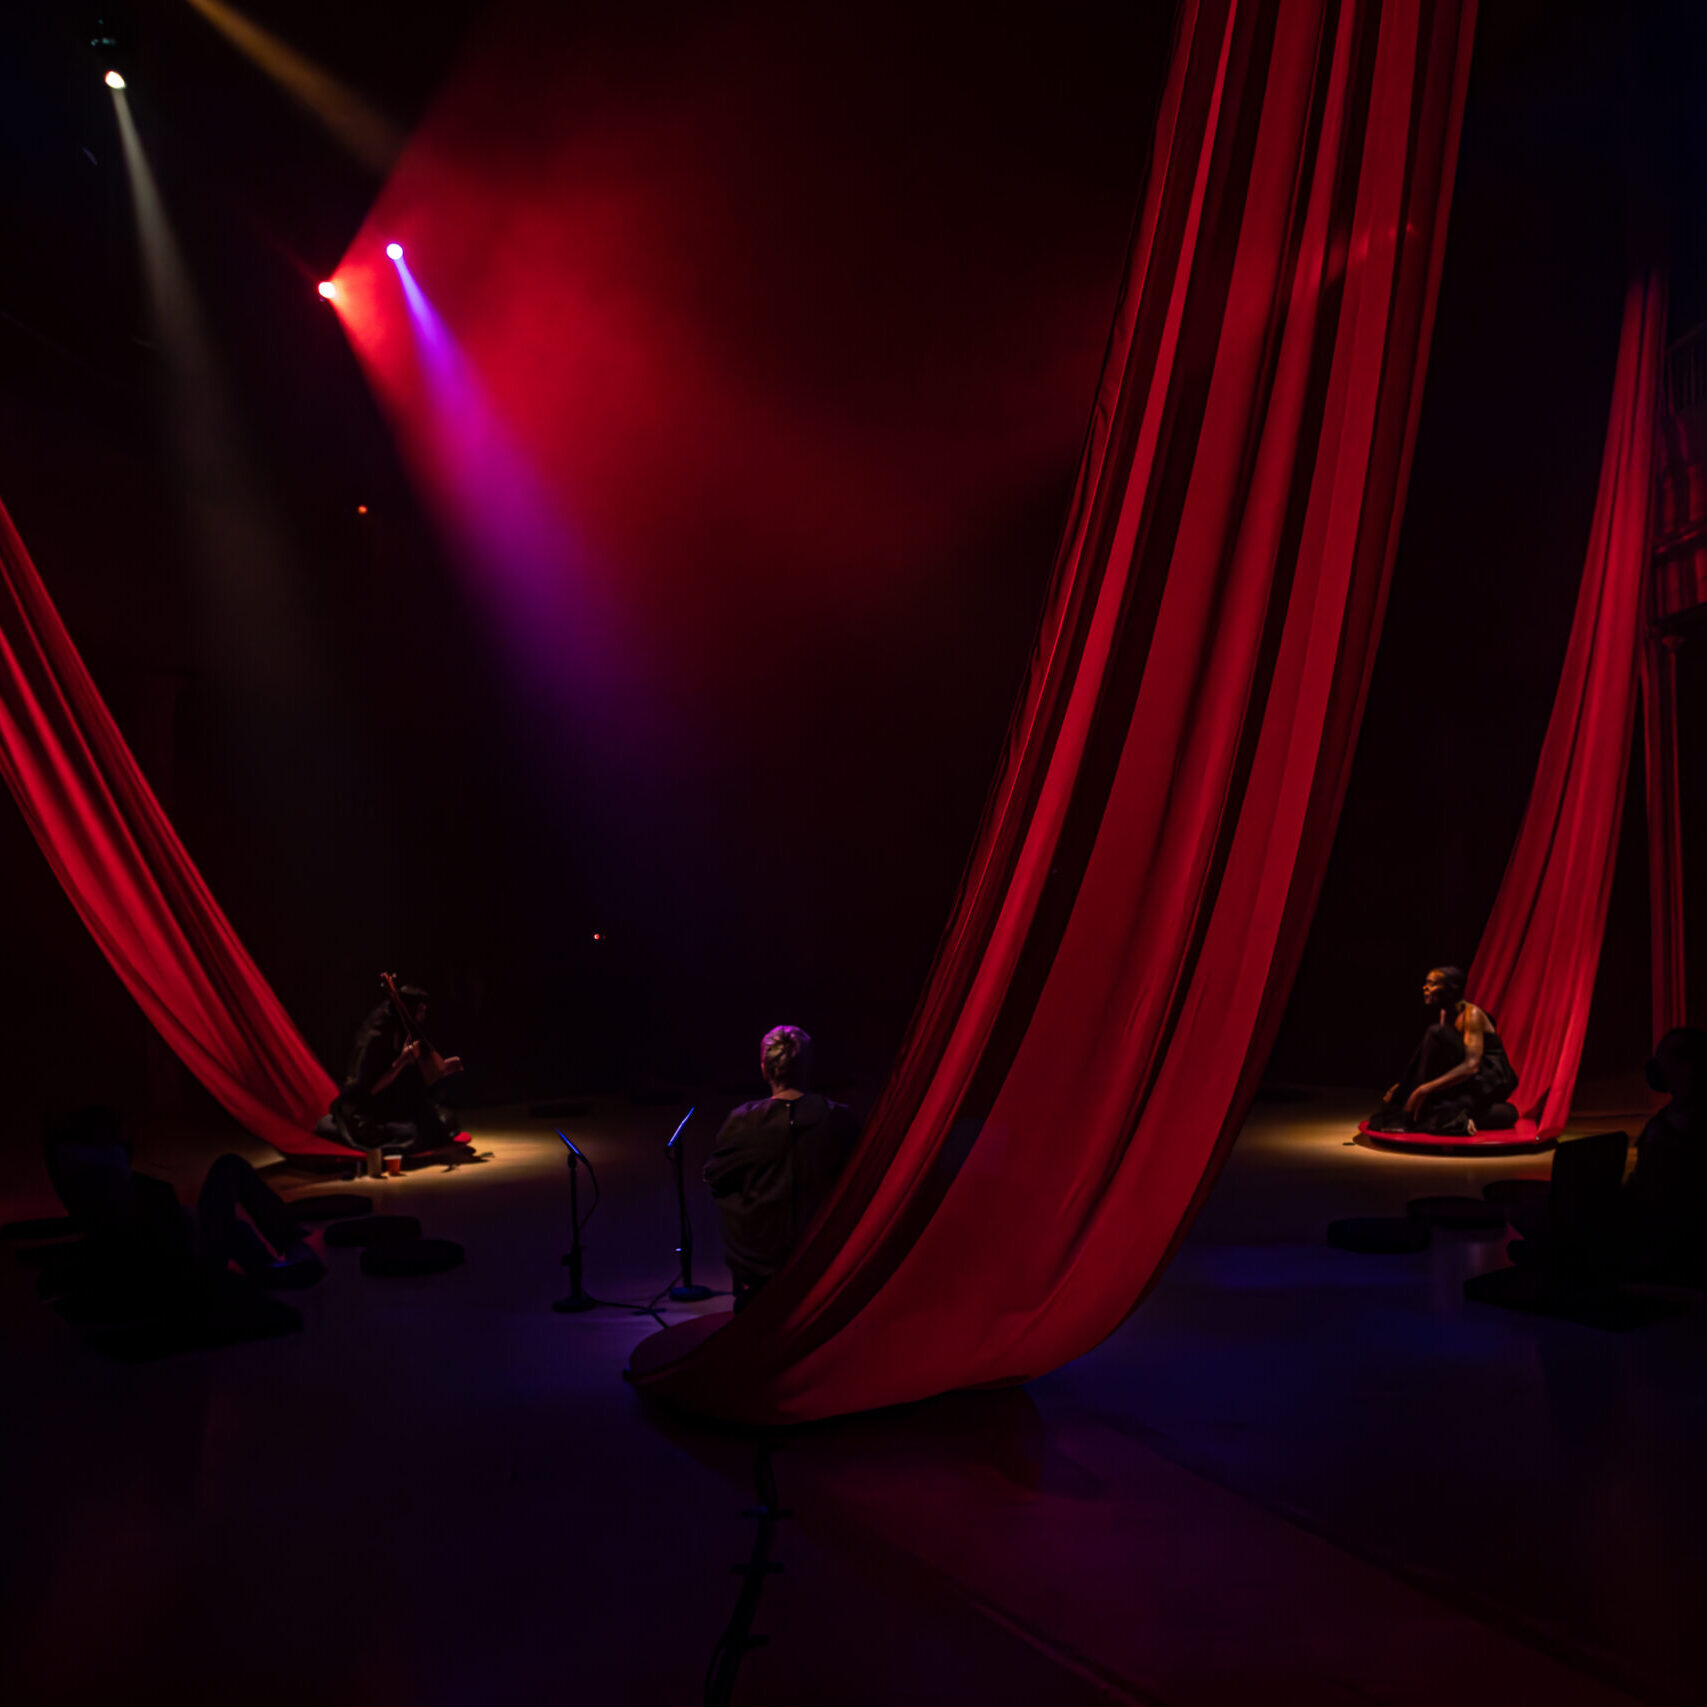 Three large red drapes are hung from the ceiling to the floor in the shape of a triangle. Three people are sitting on each piece of fabric on the floor. The room is dark with two high bright lights shining down in the upper left corner.